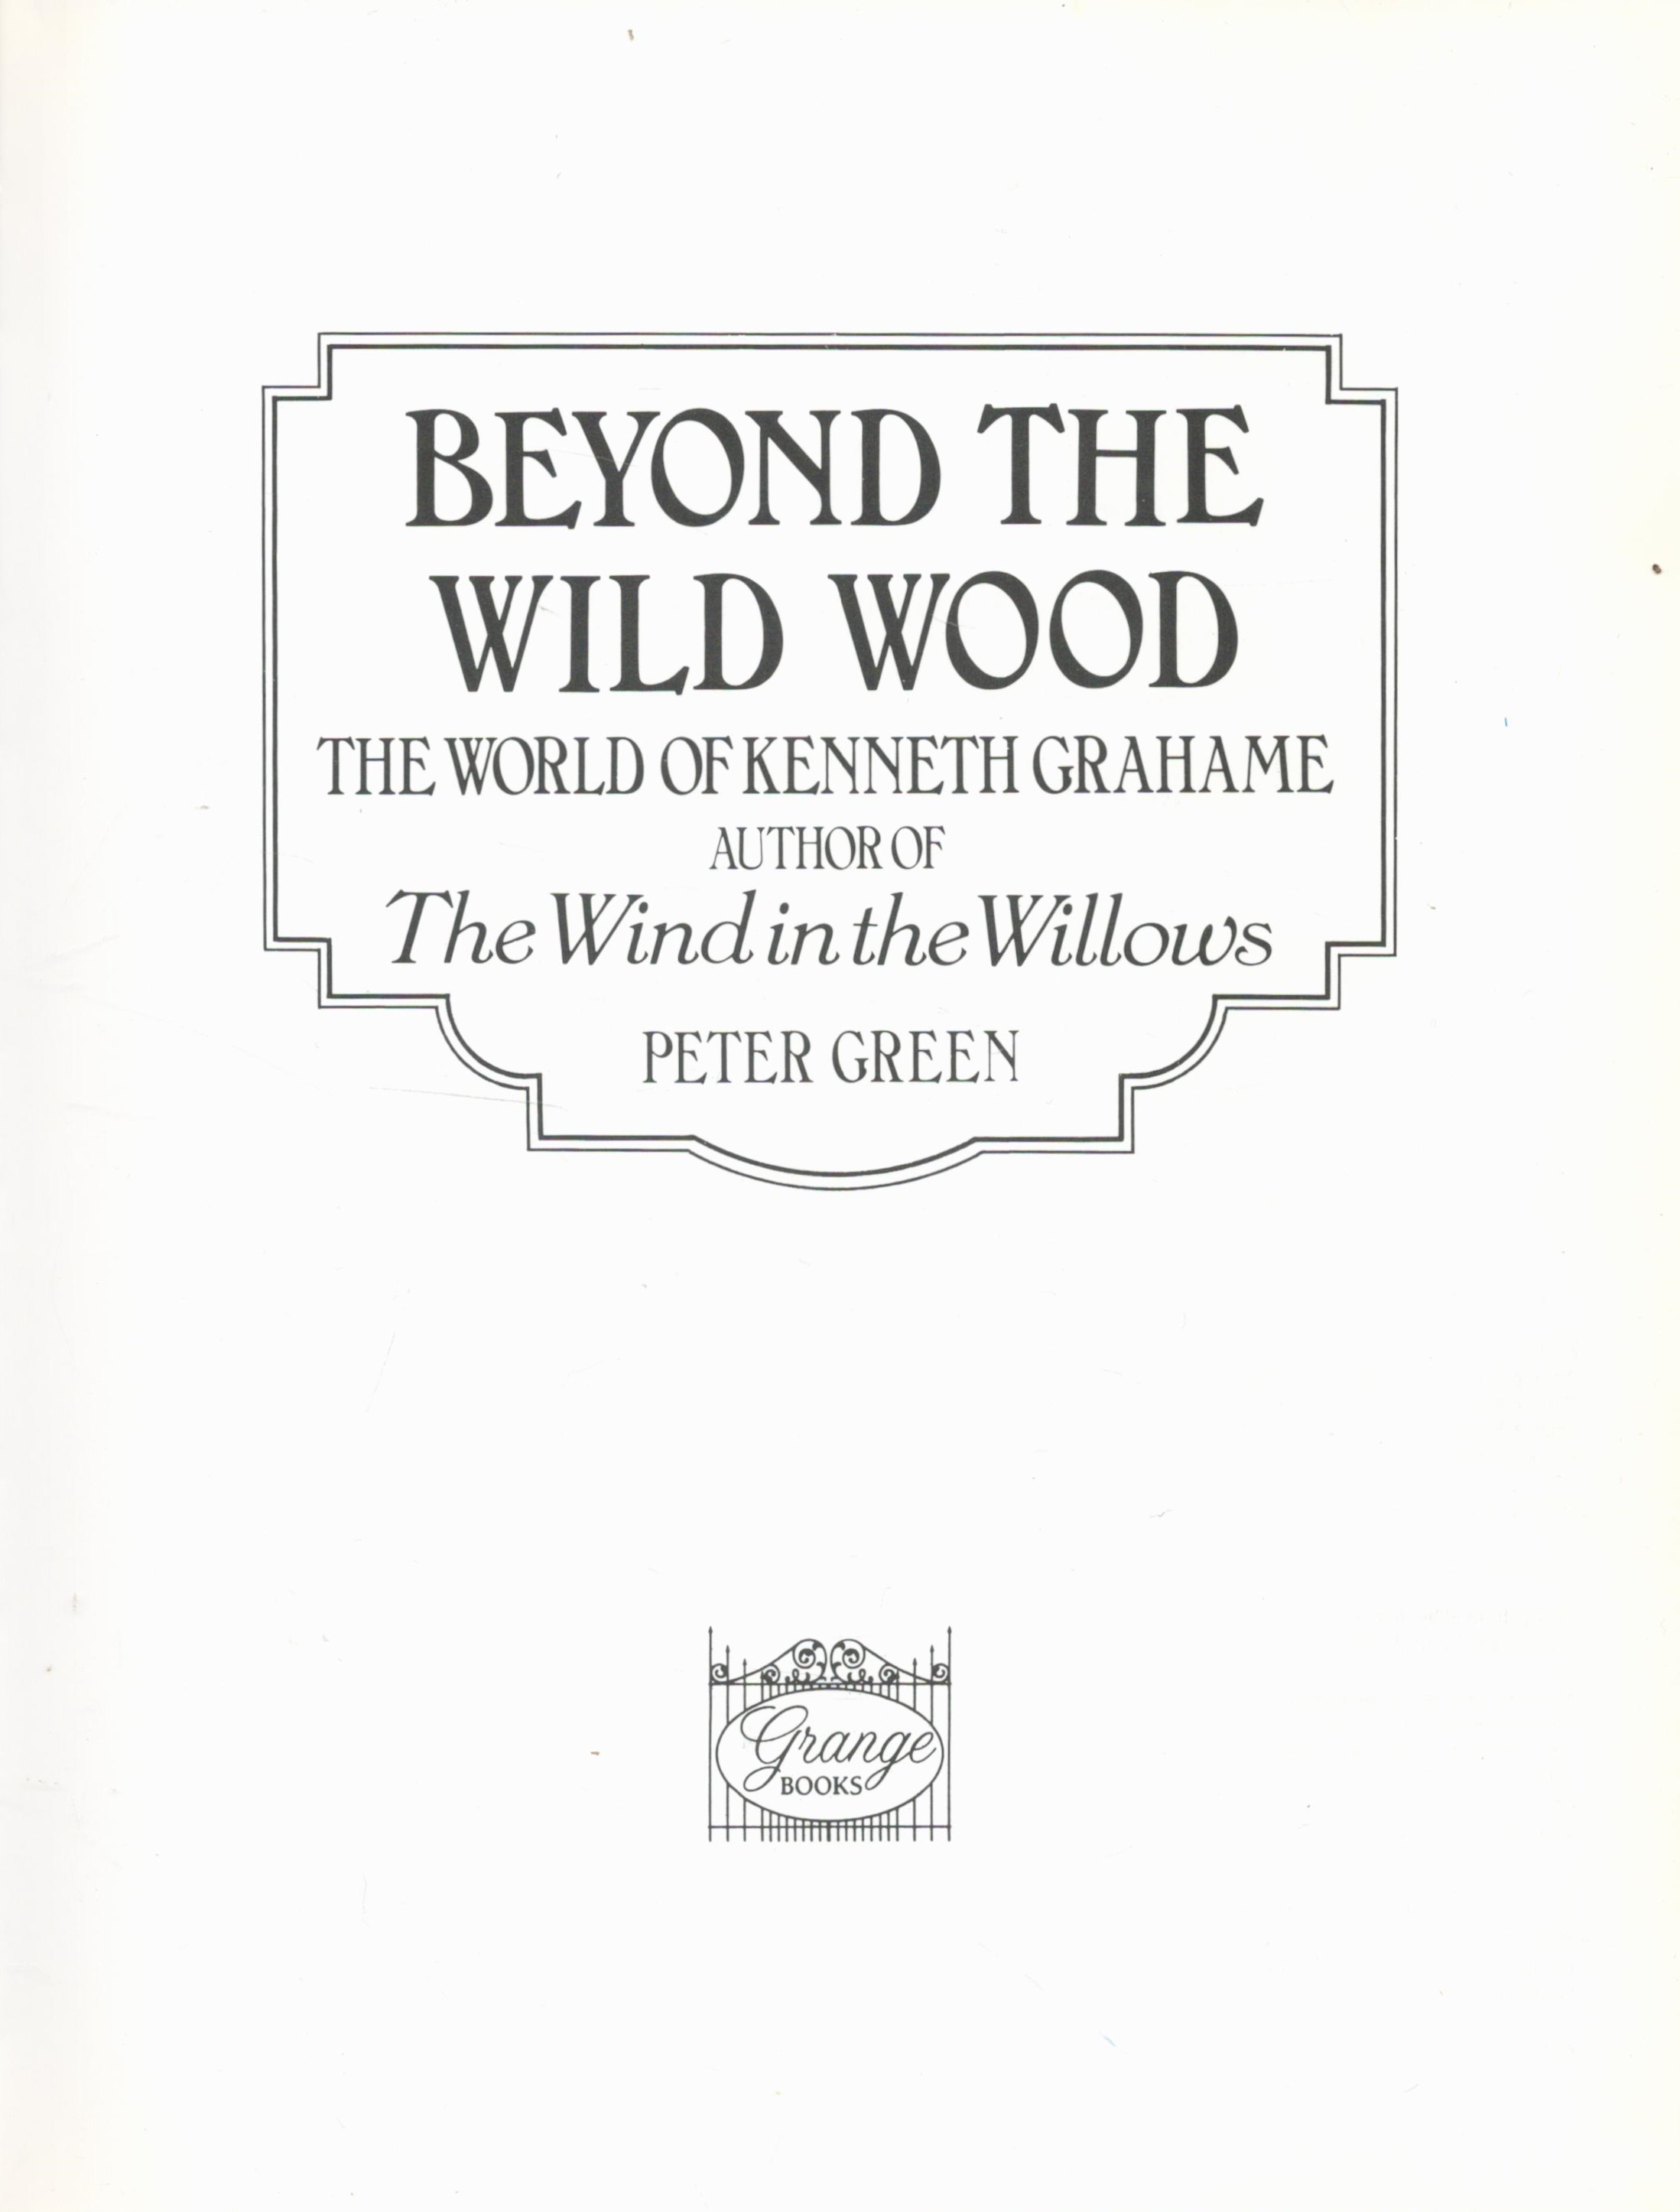 Beyond The Wild Wood The World of Kenneth Grahame by Peter Green Hardback Book 1993 edition - Image 2 of 3